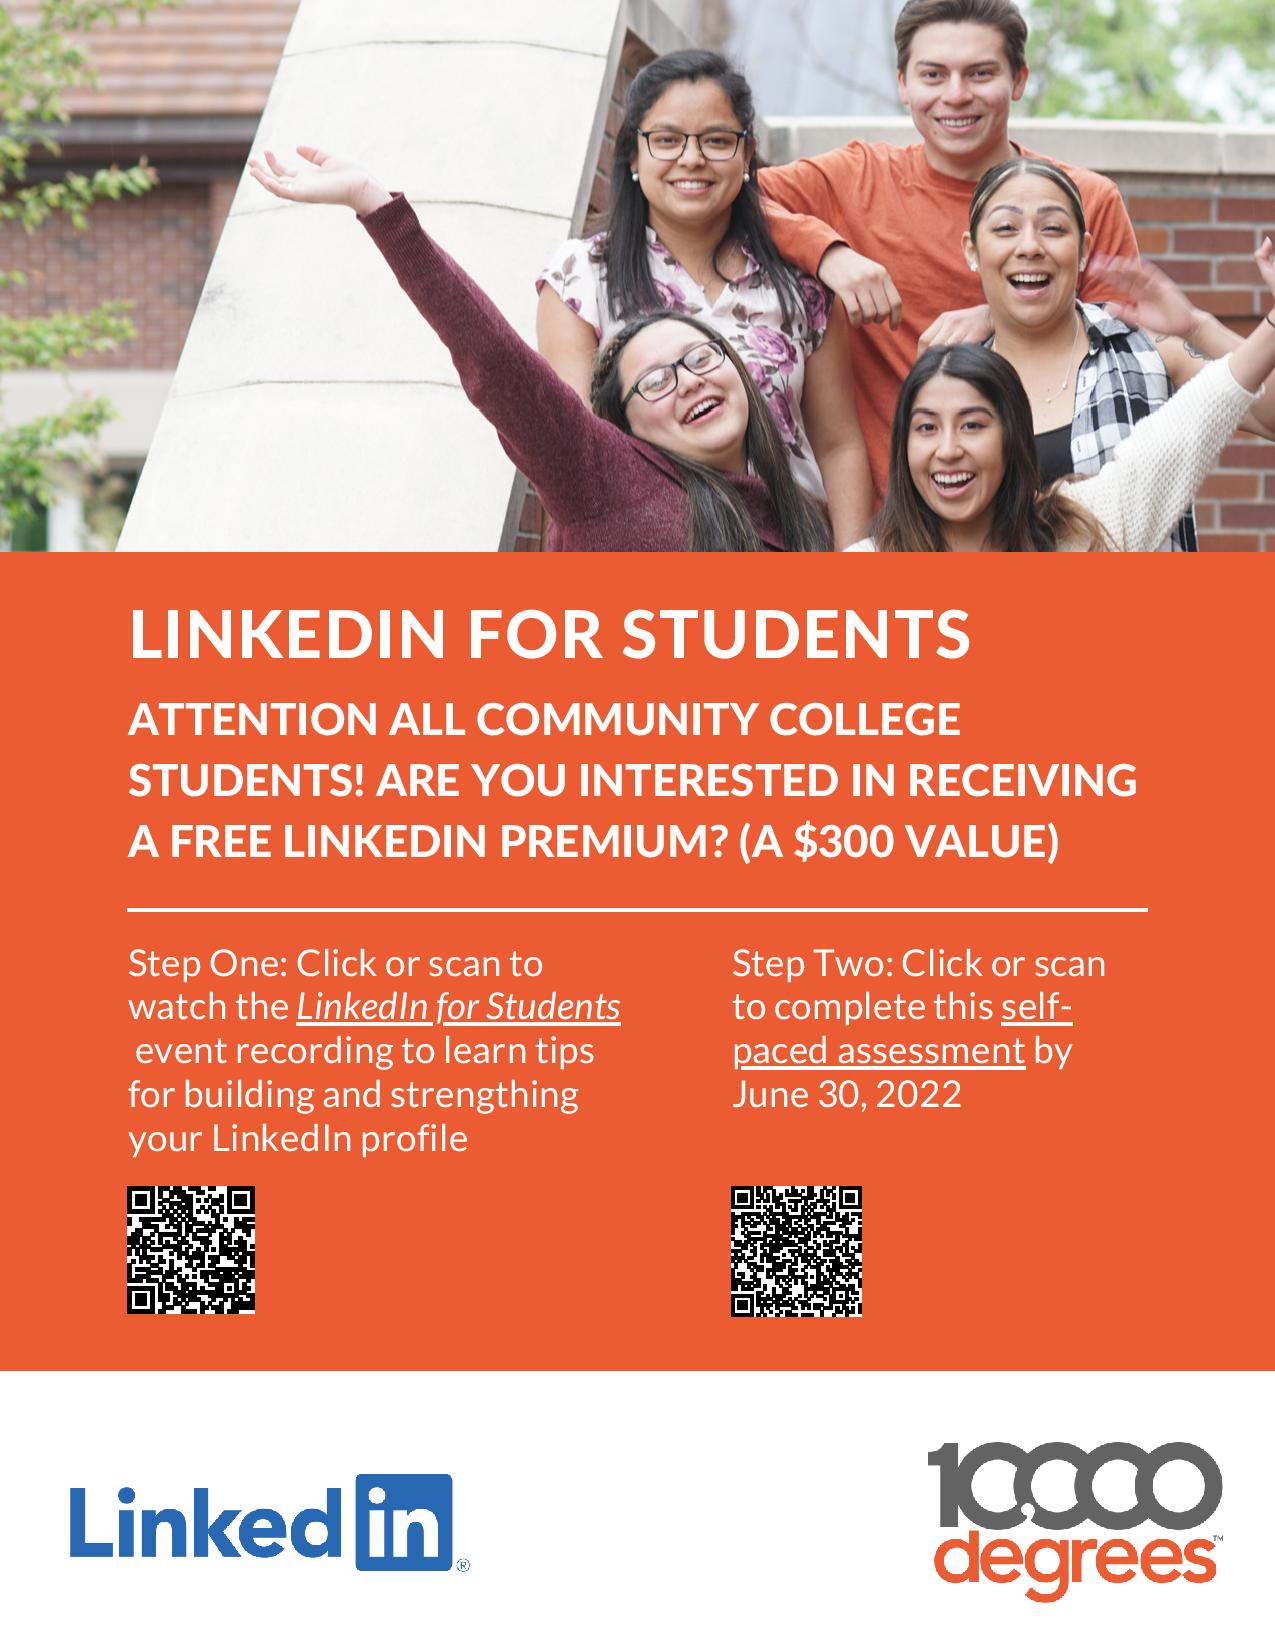 LINKEDIN FOR STUDENTS ATTENTION ALL COMMUNITY COLLEGE STUDENTS! ARE YOU INTERESTED IN RECEIVING A FREE LINKEDIN PREMIUM? (A $300 VALUE) Step One: Click or scan to watch the LinkedIn for Students event recording to learn tips for building and strengthing your LinkedIn profile Step Two: Click or scan to complete this selfpaced assessment by June 30, 2022